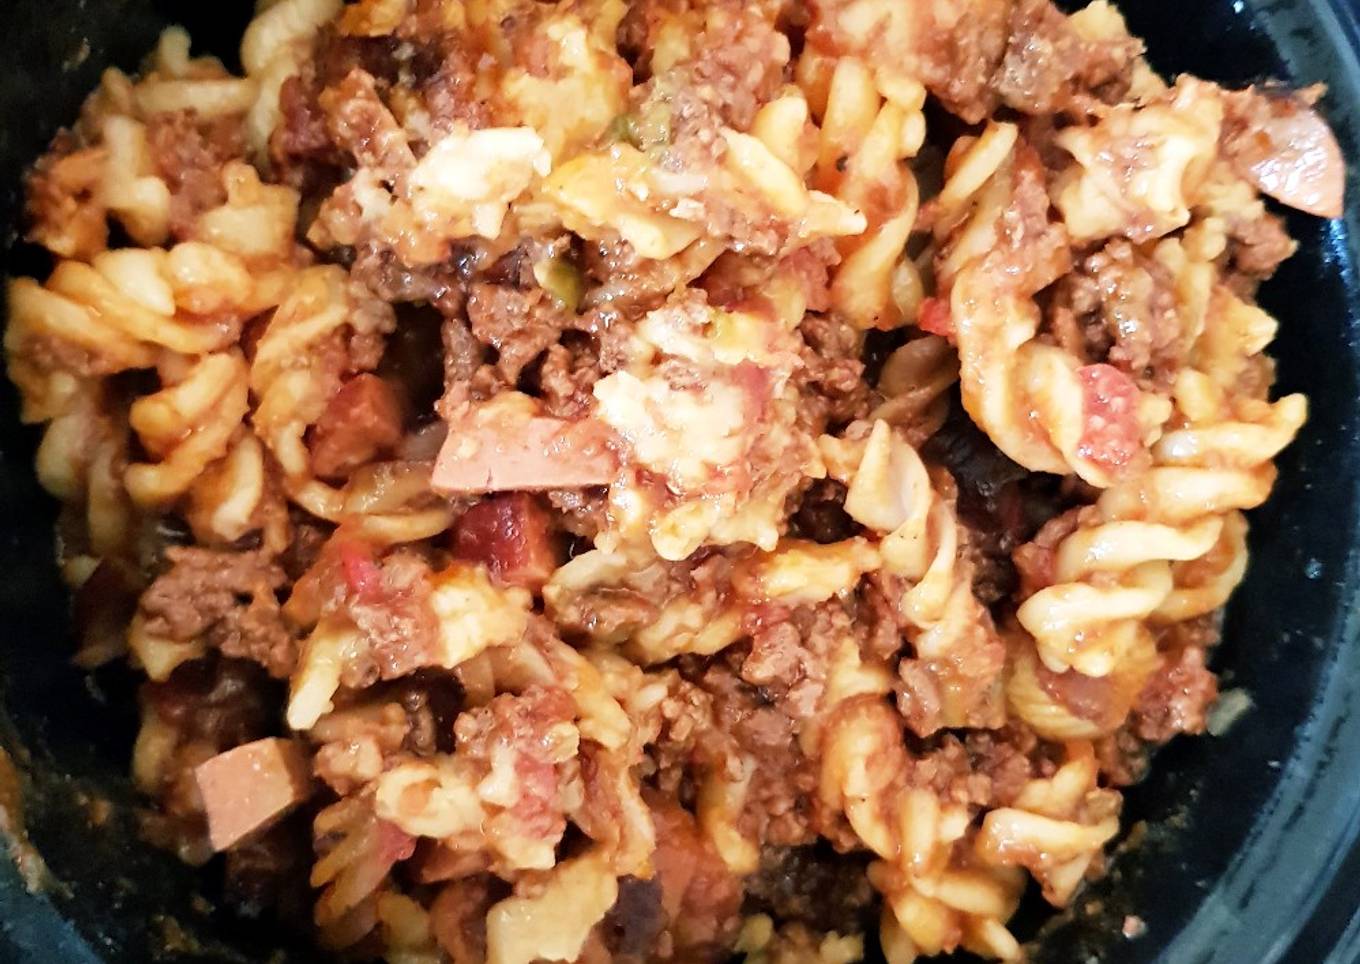 My SlowCooked Peppered Beef mince & Smoked Sausage Pasta. 😀